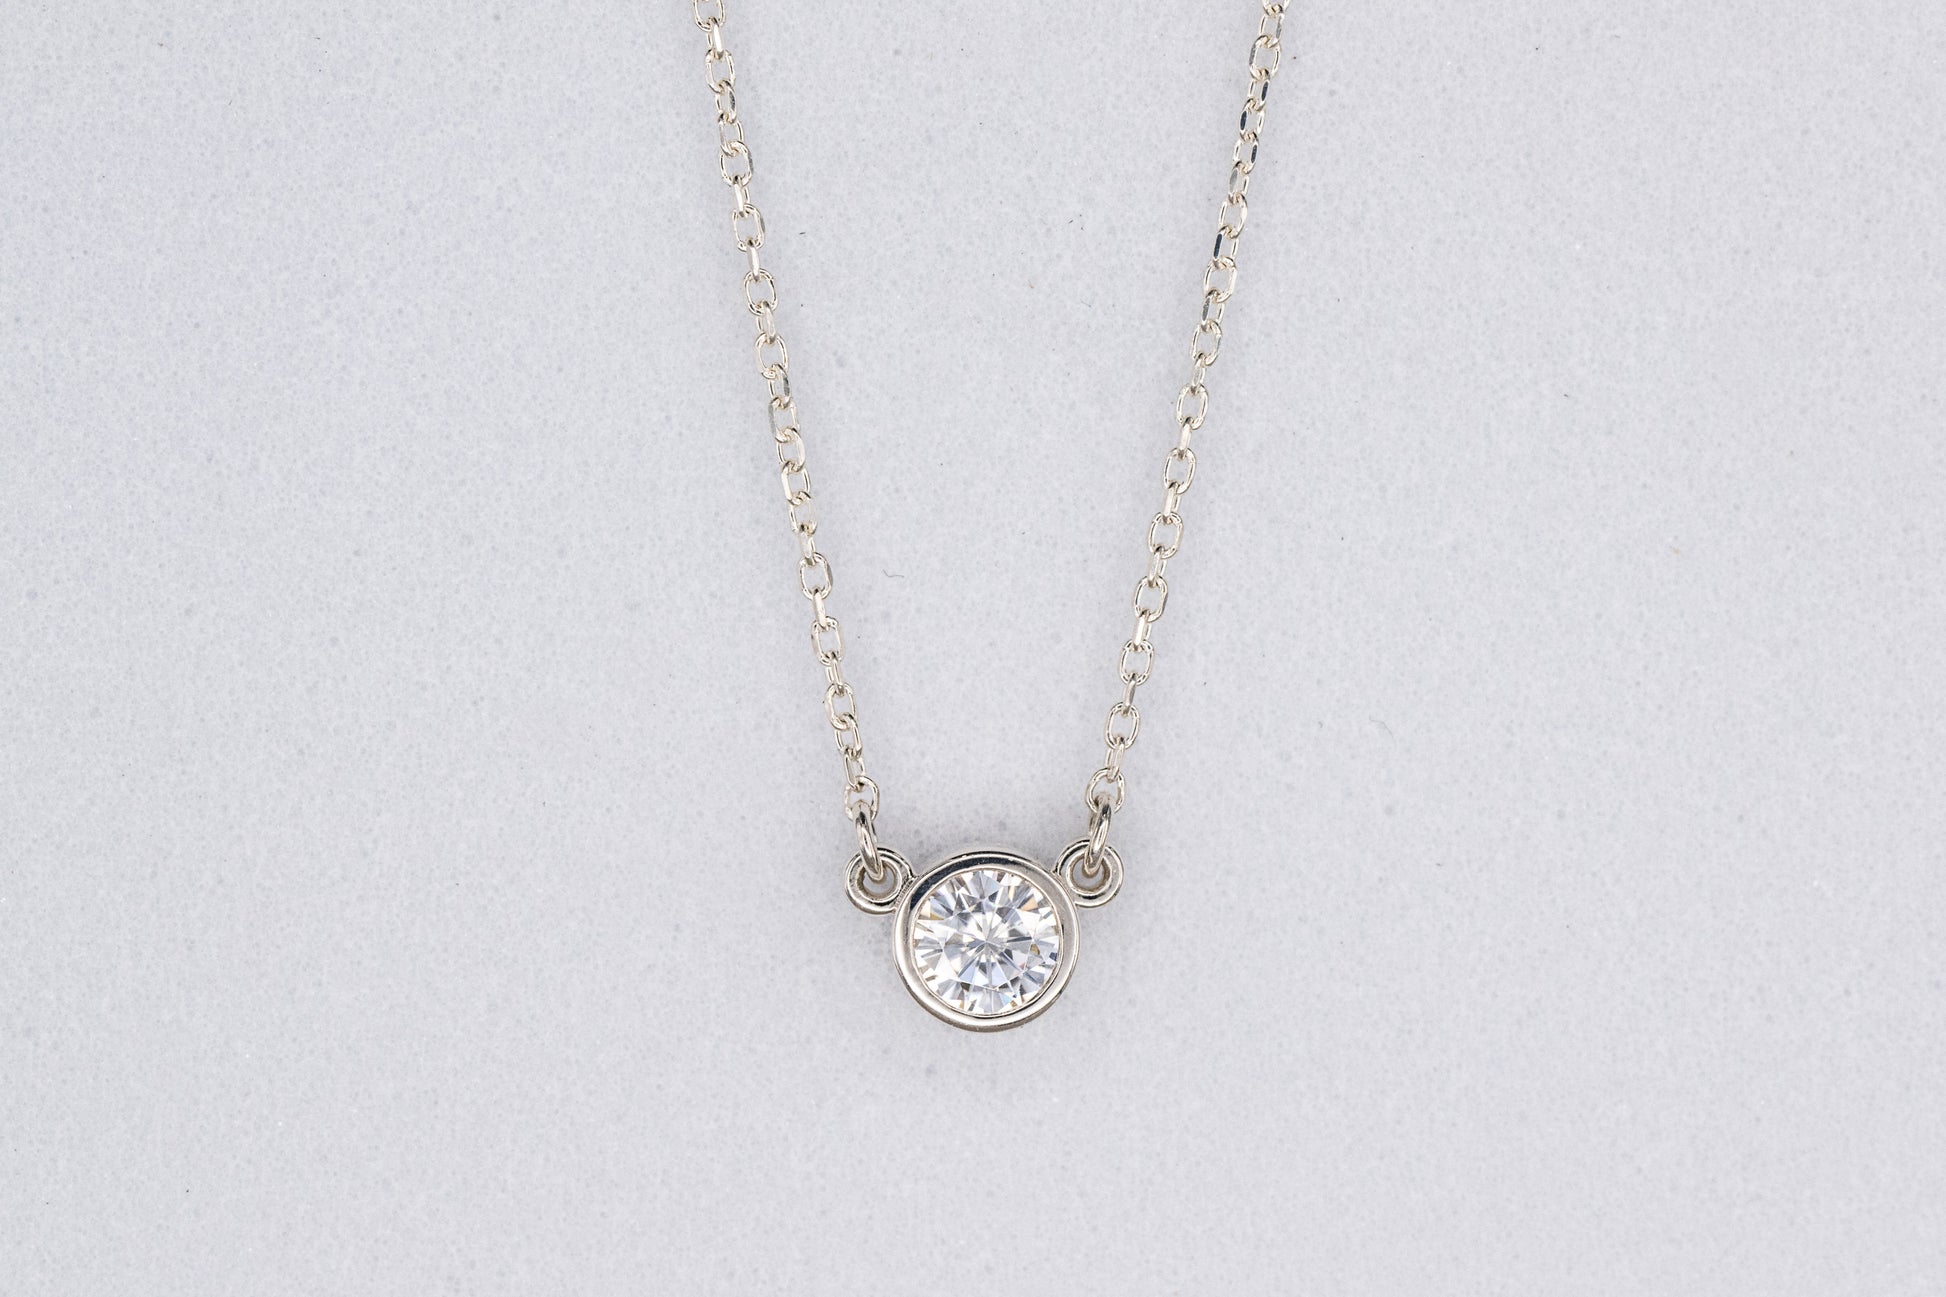 A handmade Moissanite Sterling Silver Necklace with a diamond focal point.